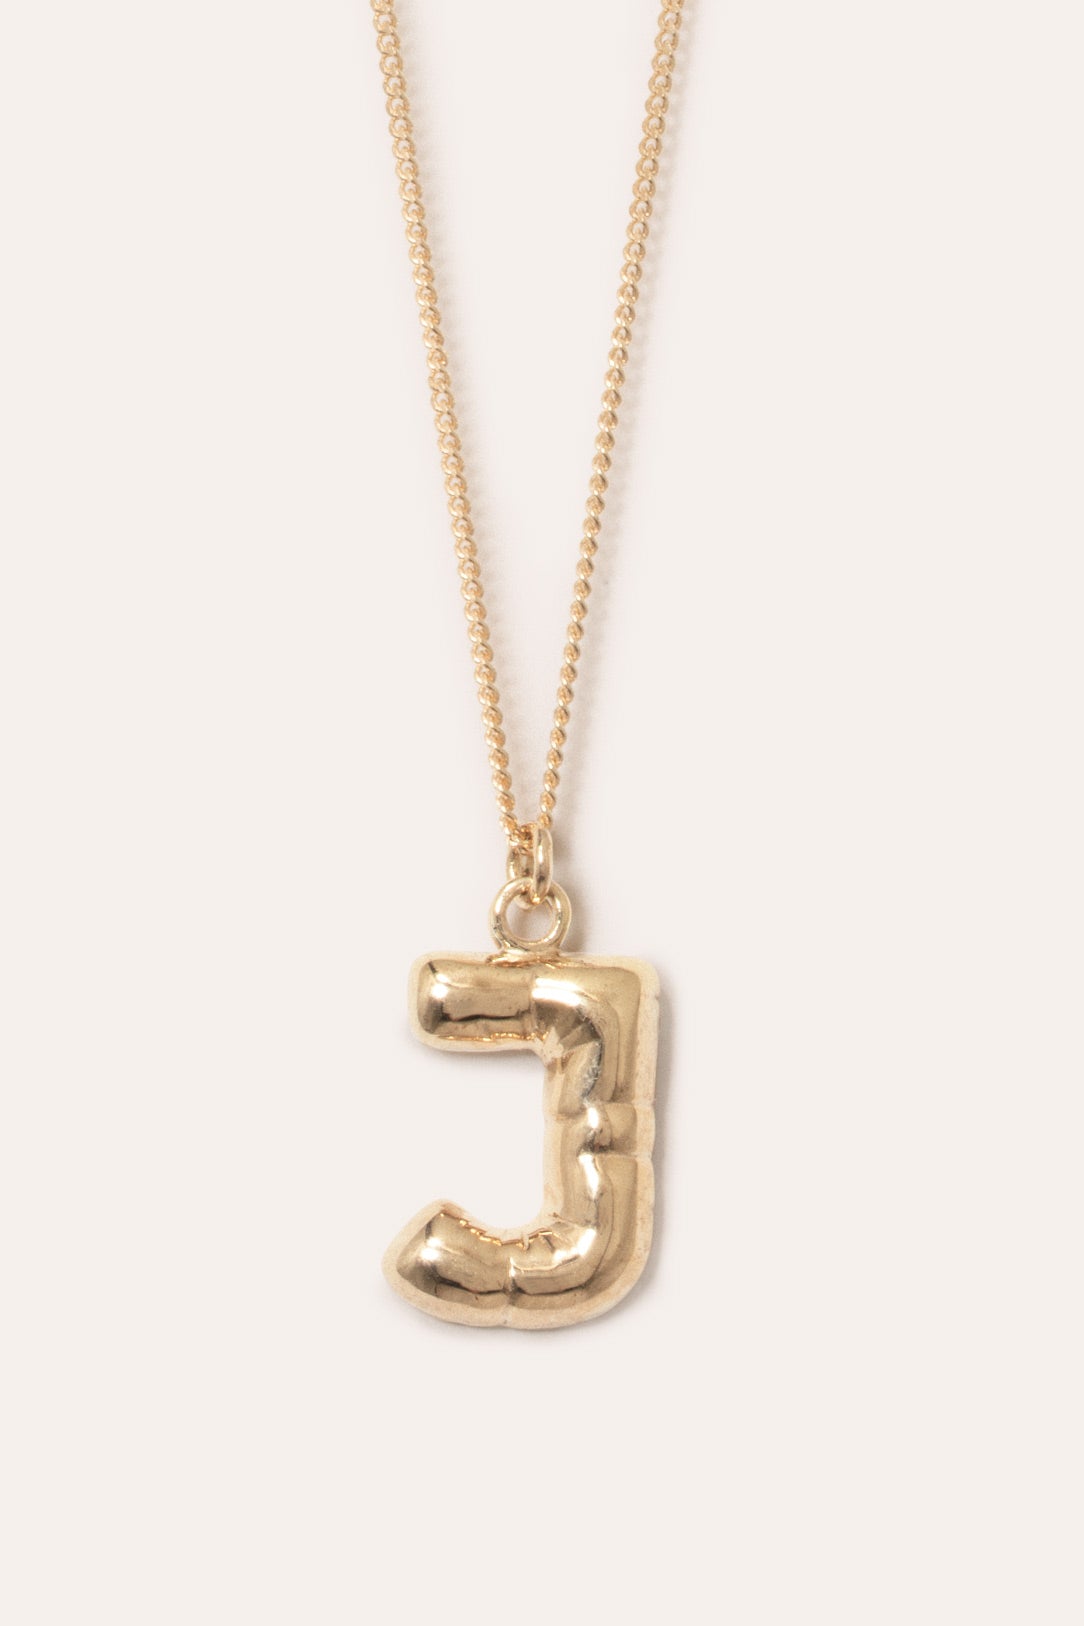 Gold Vermeil Heart Necklace with Initials - Paperclip Chain - Talisa